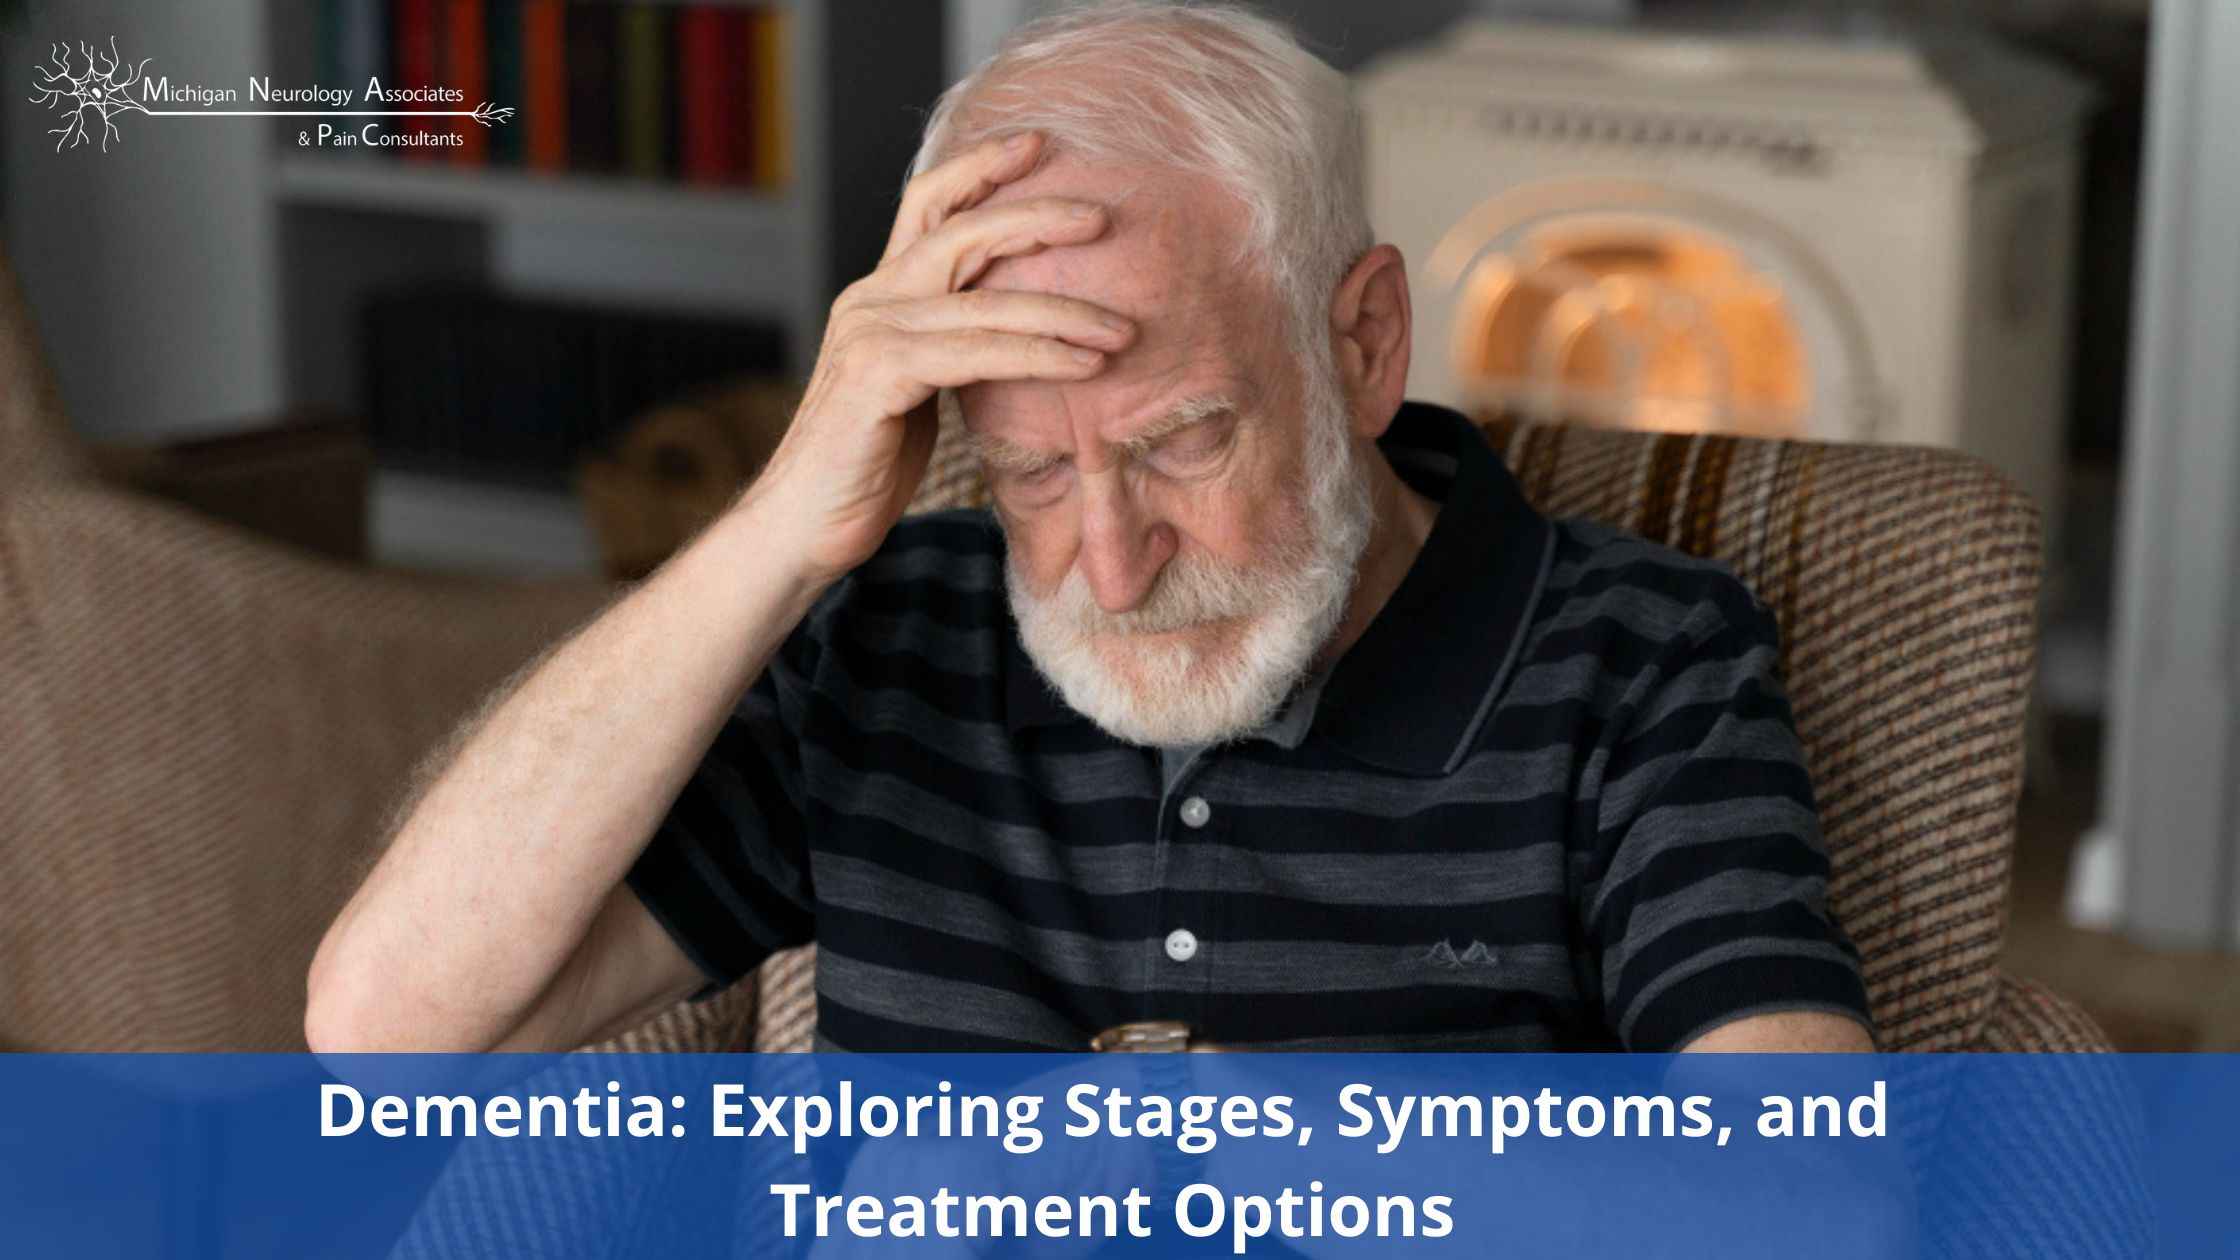 Dementia: Exploring Stages, Symptoms, and Treatment Options